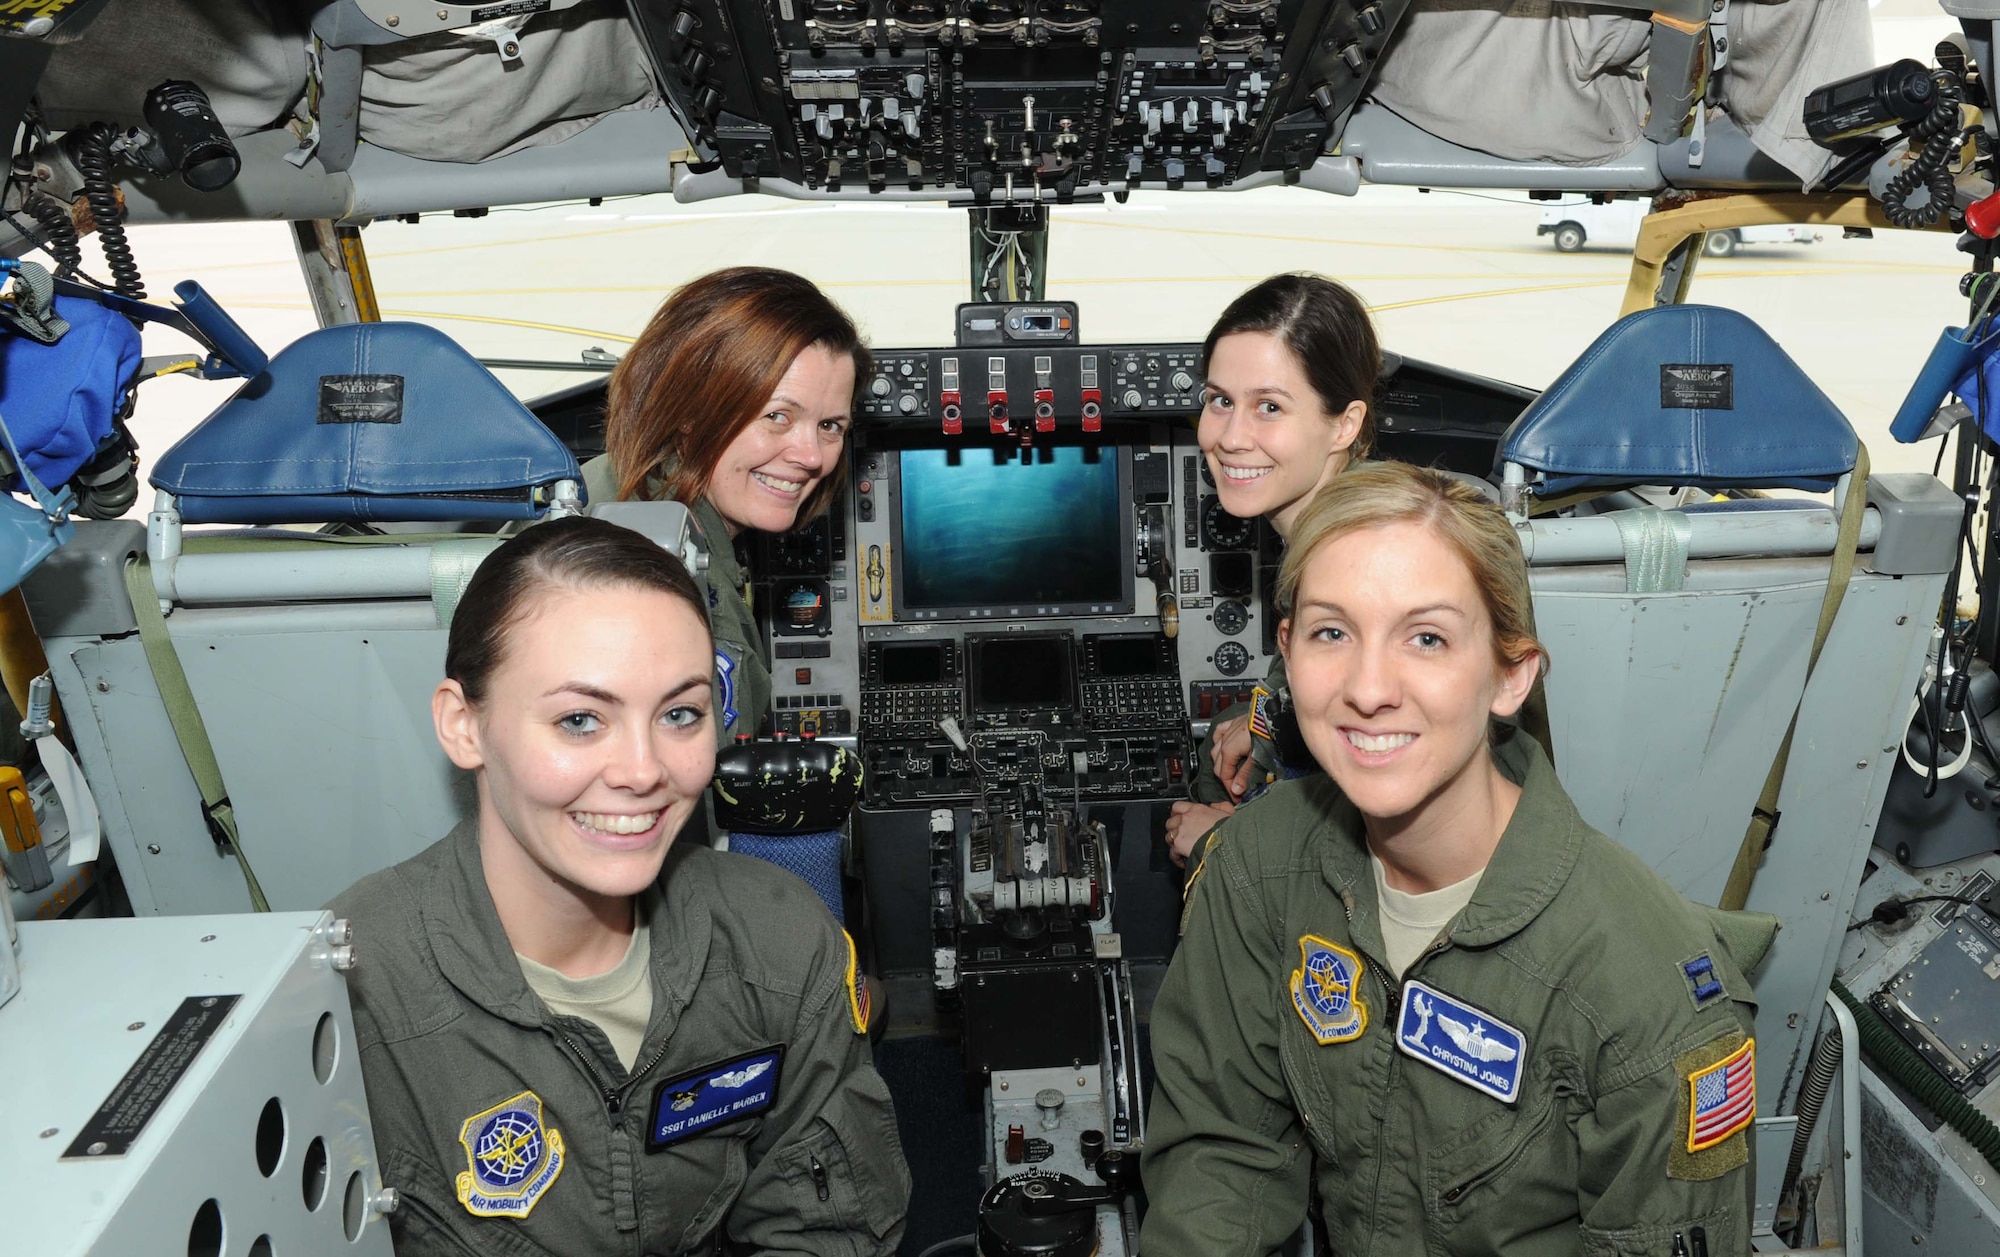 Lt. Col. Jasmin Silence, 350th Air Refueling Squadron commander, Capt. Rachel Quirarte, 349th ARS pilot, Staff Sgt. Danielle Warren, 344th ARS boom operator, and Maj. Chrystina Jones, 22nd Air Refueling Wing Plans and Programs deputy chief, sit in a KC-135 Stratotanker February 23, 2017 at McConnell Air Force Base, Kan. All four attended the 2017 Women in Aviation International Conference March 2-5, Orlando, Florida. (U.S. Air Force photo/Senior Airman Tara Fadenrecht)